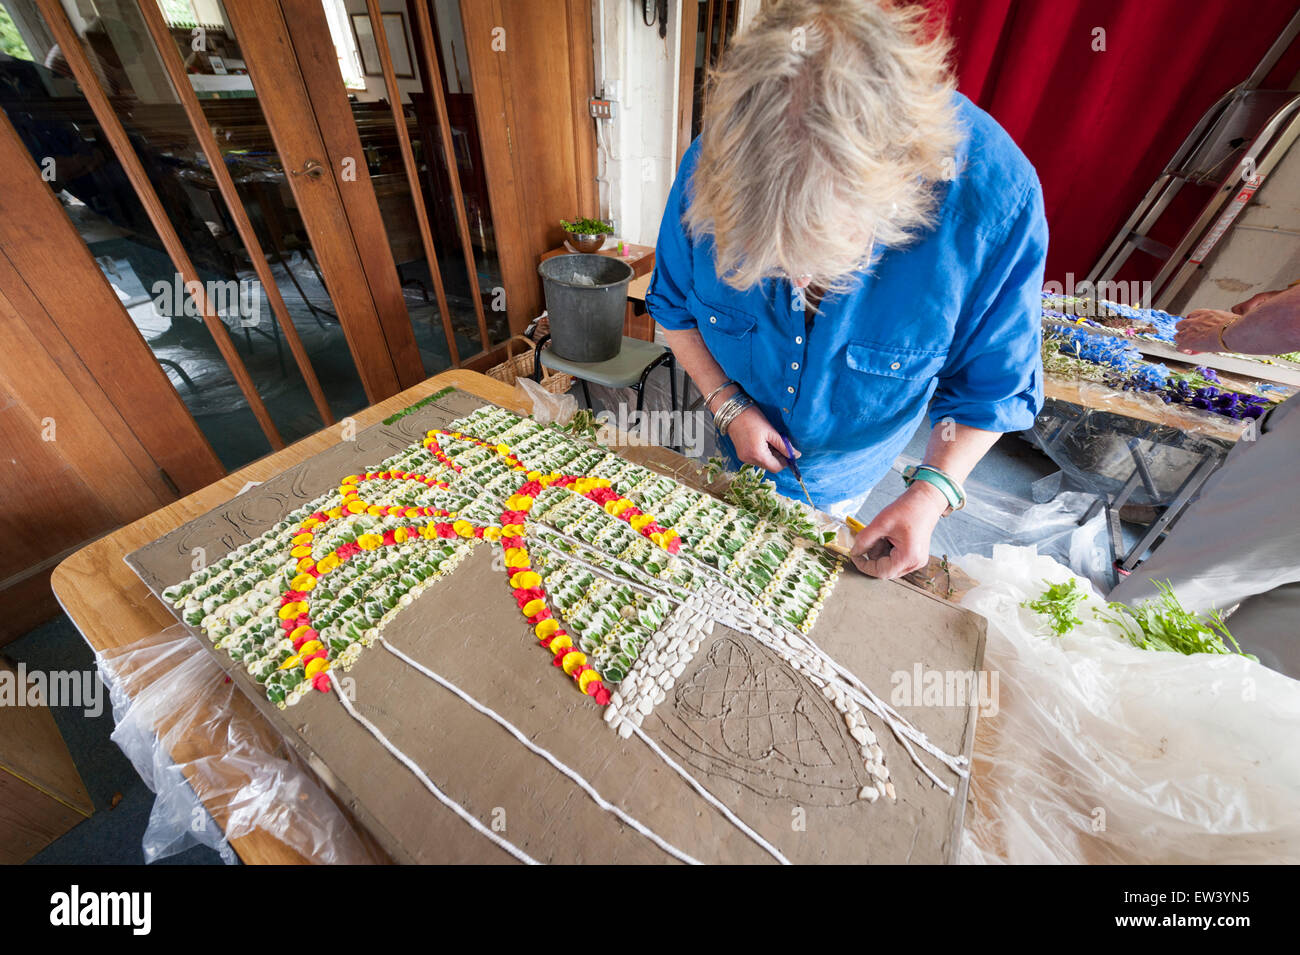 Holywell, UK. 17th June, 2015. Jill Harvey decorates a wooden frame with thousands of individual flower petals and seeds to form an intricate mosaic picture that is displayed by the ancient well at the Church of St John the Baptist in the riverside village of Holywell, Cambridgeshire UK. The painstaking task is carried out by a team of local volunteers and starts with the design being pricked out in the clay, followed by the placing of individual petals pressed into the clay with a cocktail stick. Credit:  Julian Eales/Alamy Live News Stock Photo